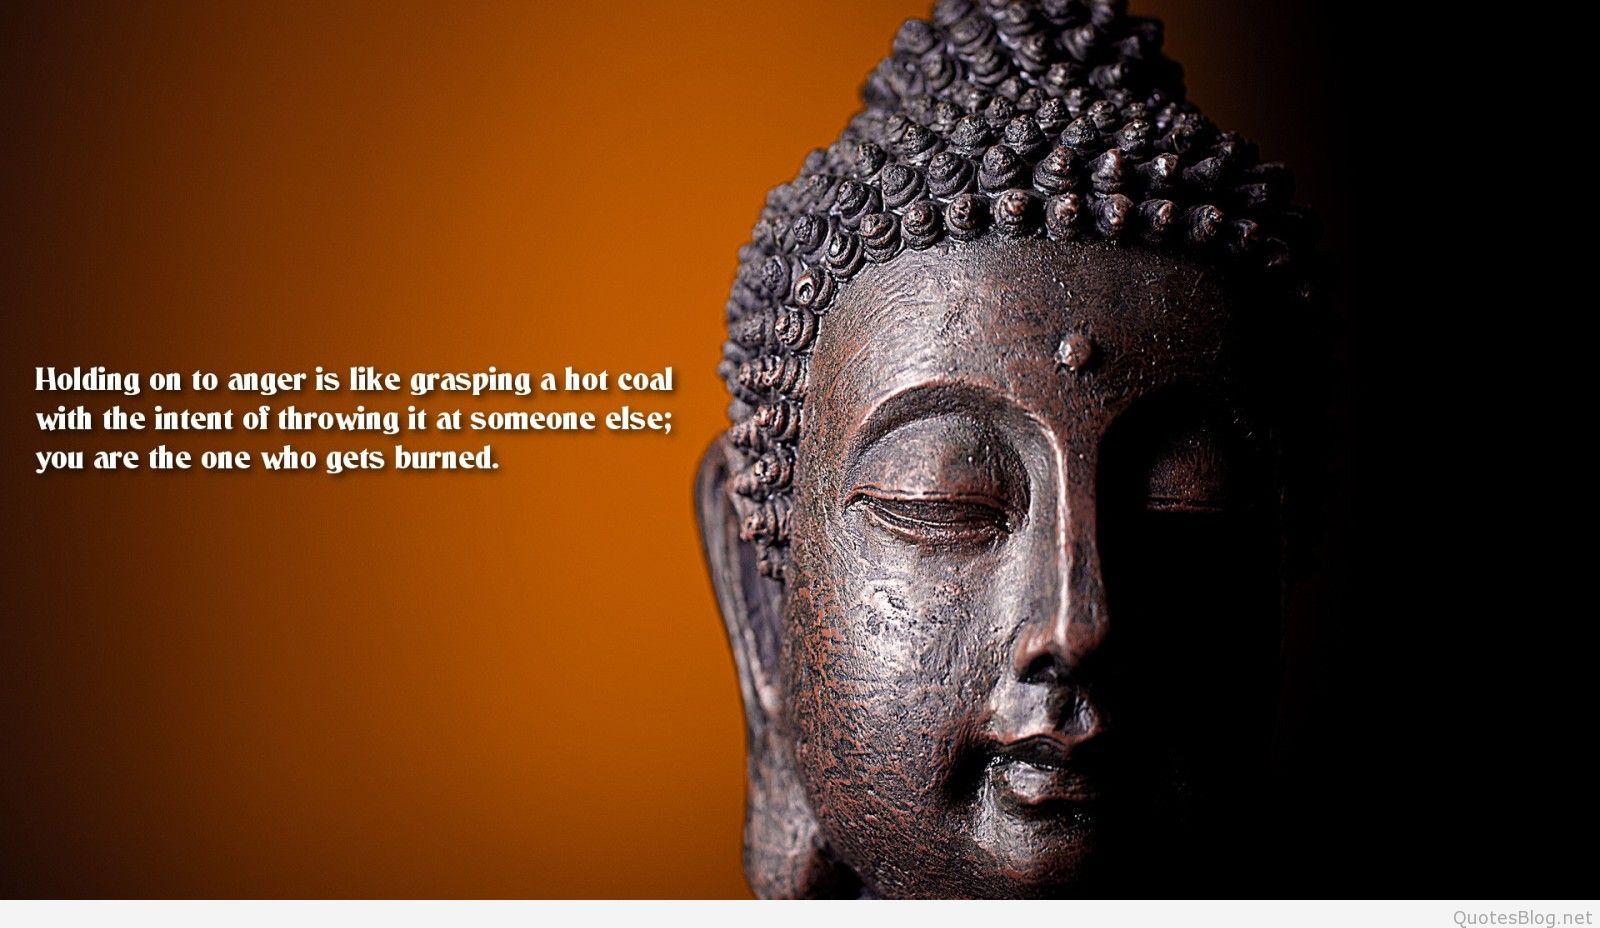 Buddhist Buddha quotes, picture and quotes wallpaper